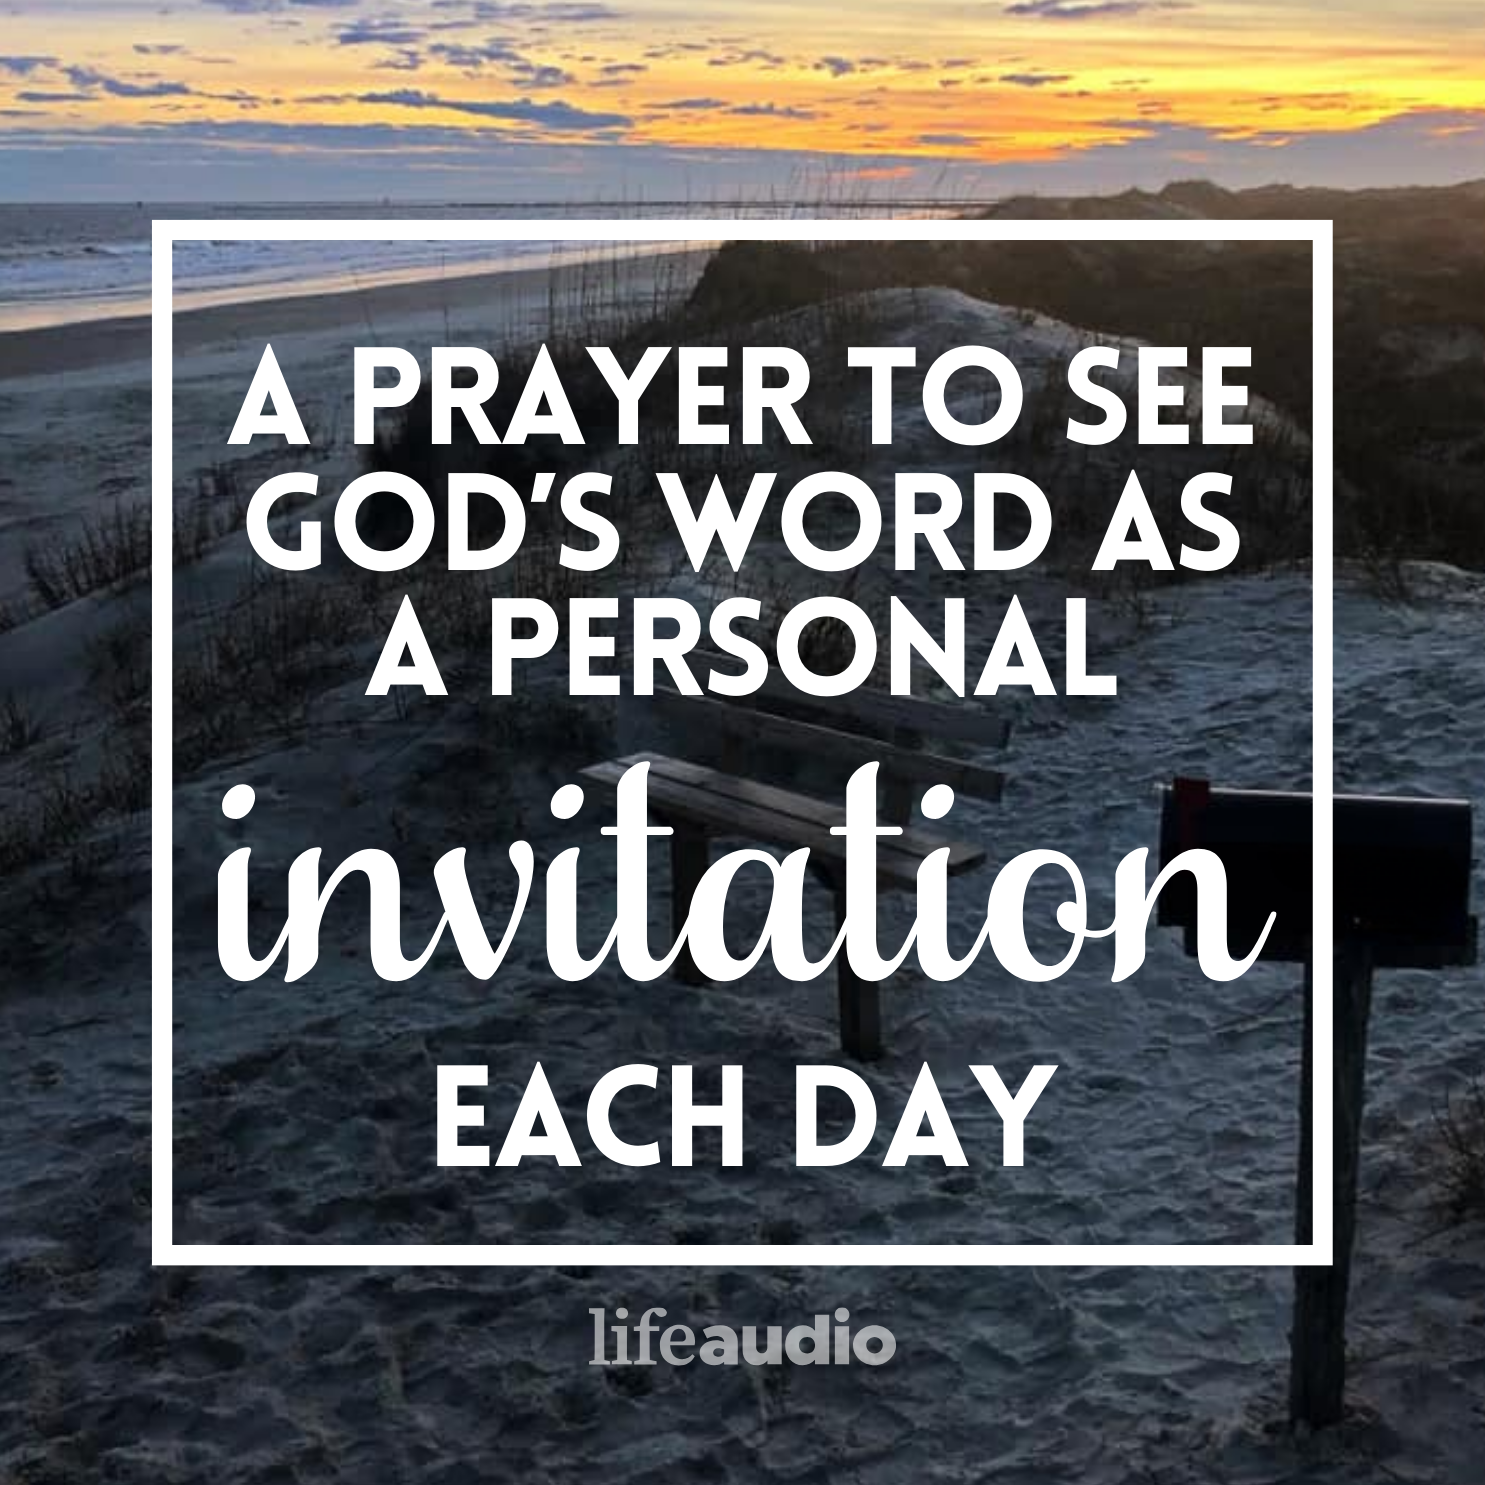 A Prayer to See God‘s Word as a Personal Invitation Each Day